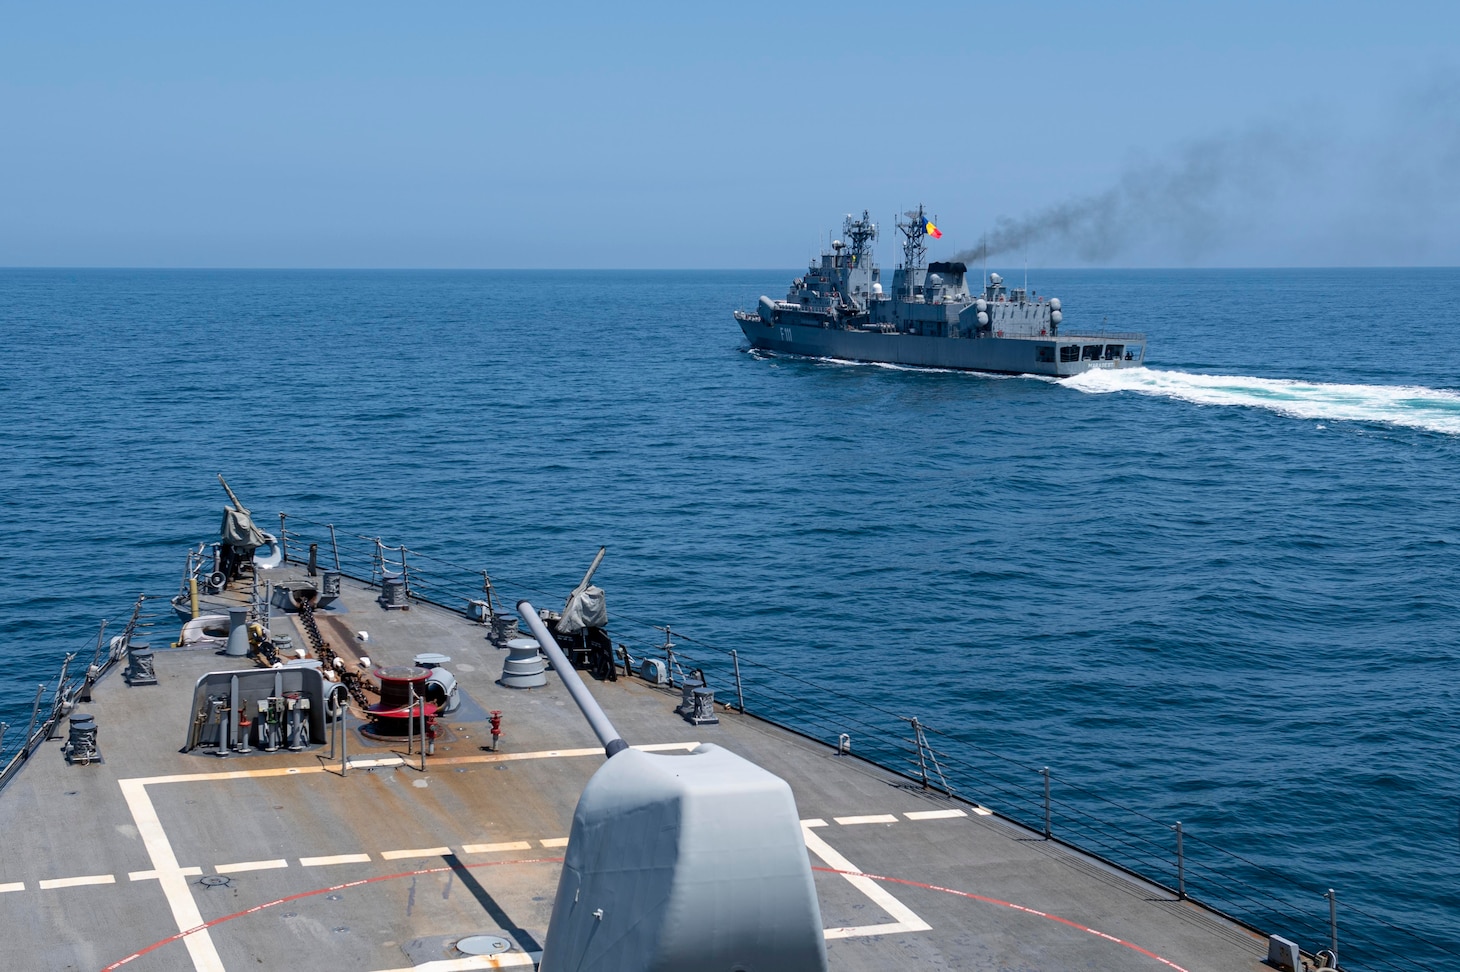 The Romanian Navy frigate ROS Marasesti (F 111), right, sails in formation with the Arleigh Burke-class guided-missile destroyer USS Laboon (DDG 58) during a passing and communication exercise in the Black Sea, June 23, 2021.